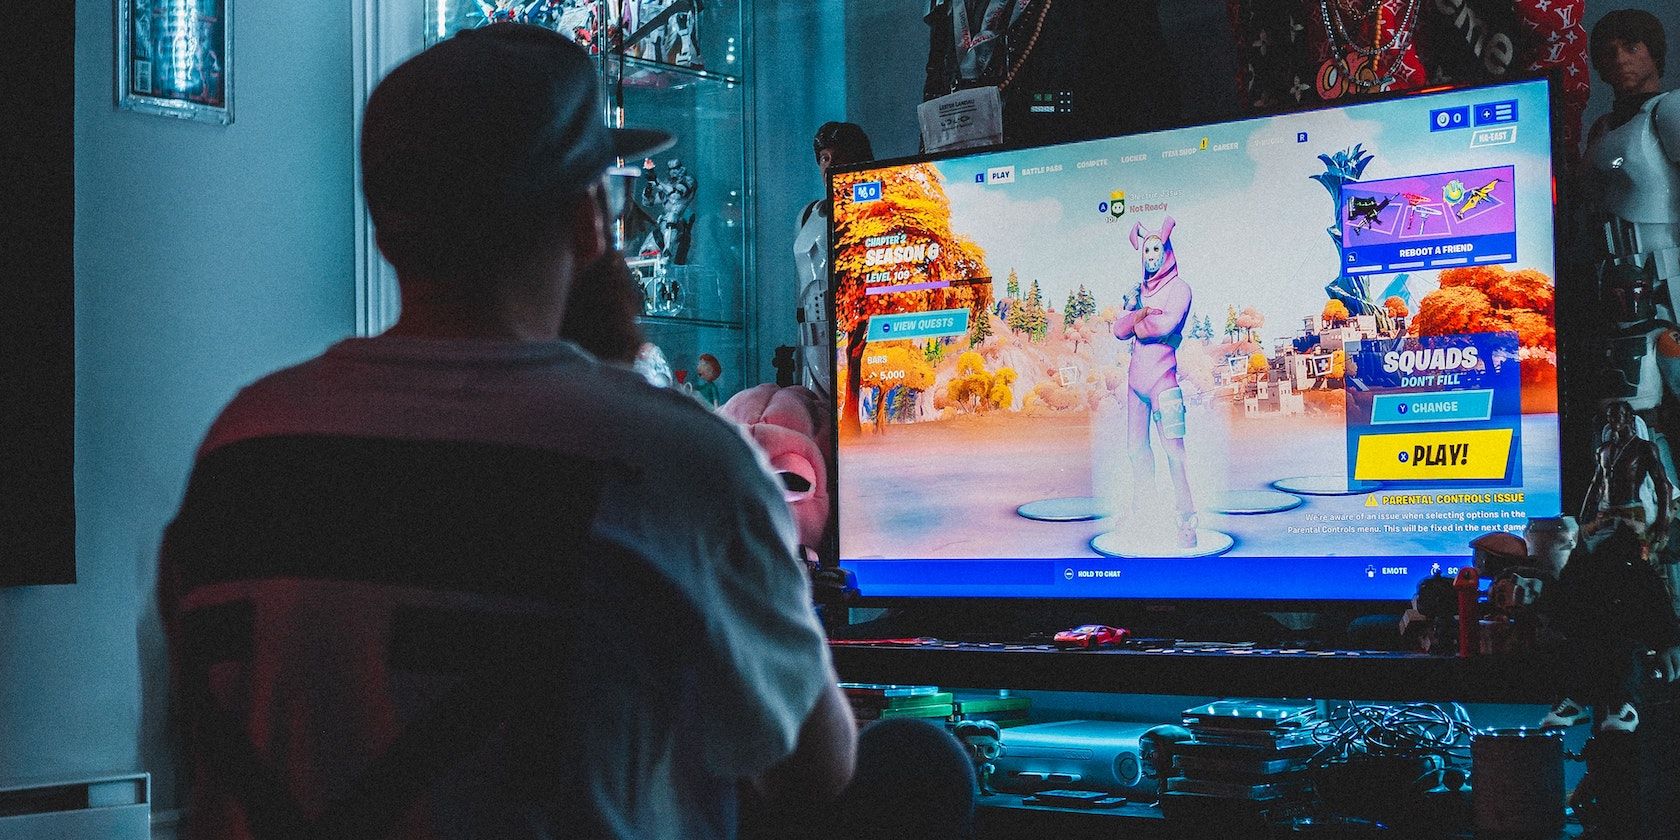 A person wearing a cap and playing Fortnite